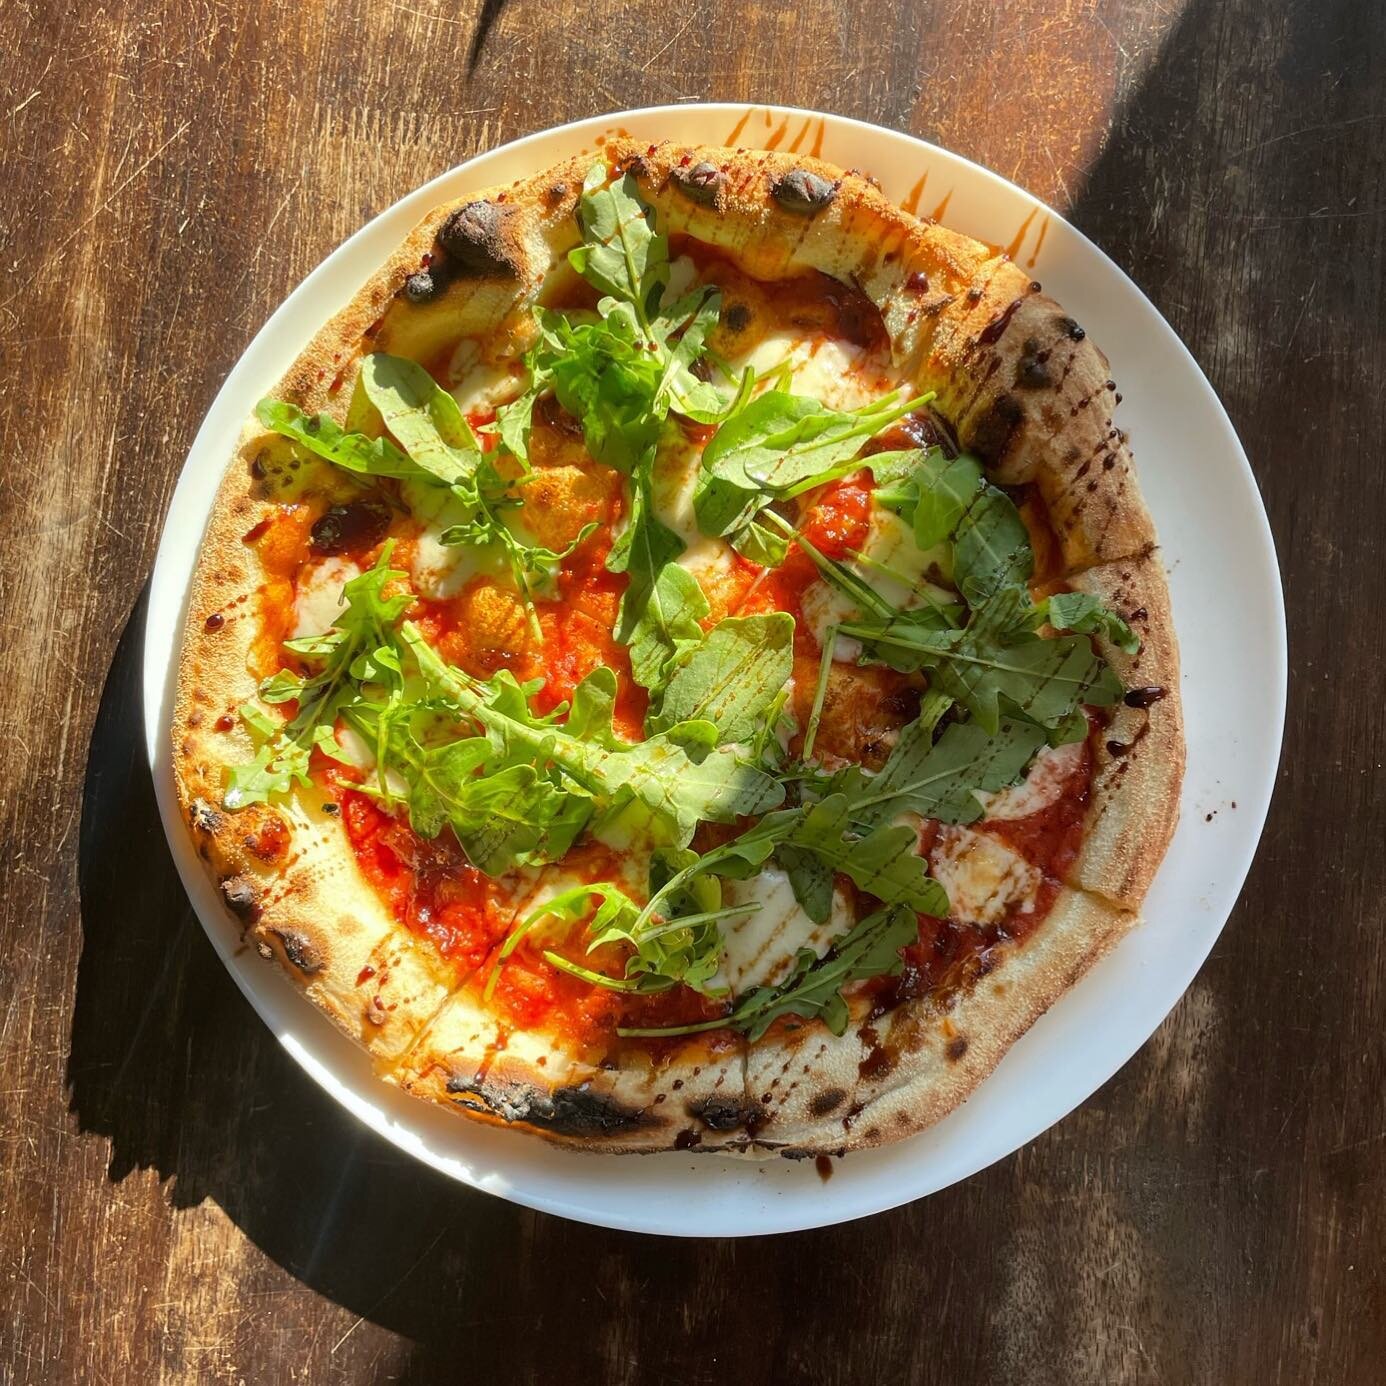 PERCH PIZZAS! Friday 5-8pm, collection from the caf&eacute;!

*reminder there won&rsquo;t be pizzas next weekend as we&rsquo;re doing sit-in evening meals!*

Our menu can be found at theperch.uk 

Sides include
- homemade coleslaw
- garlic dip
- chee